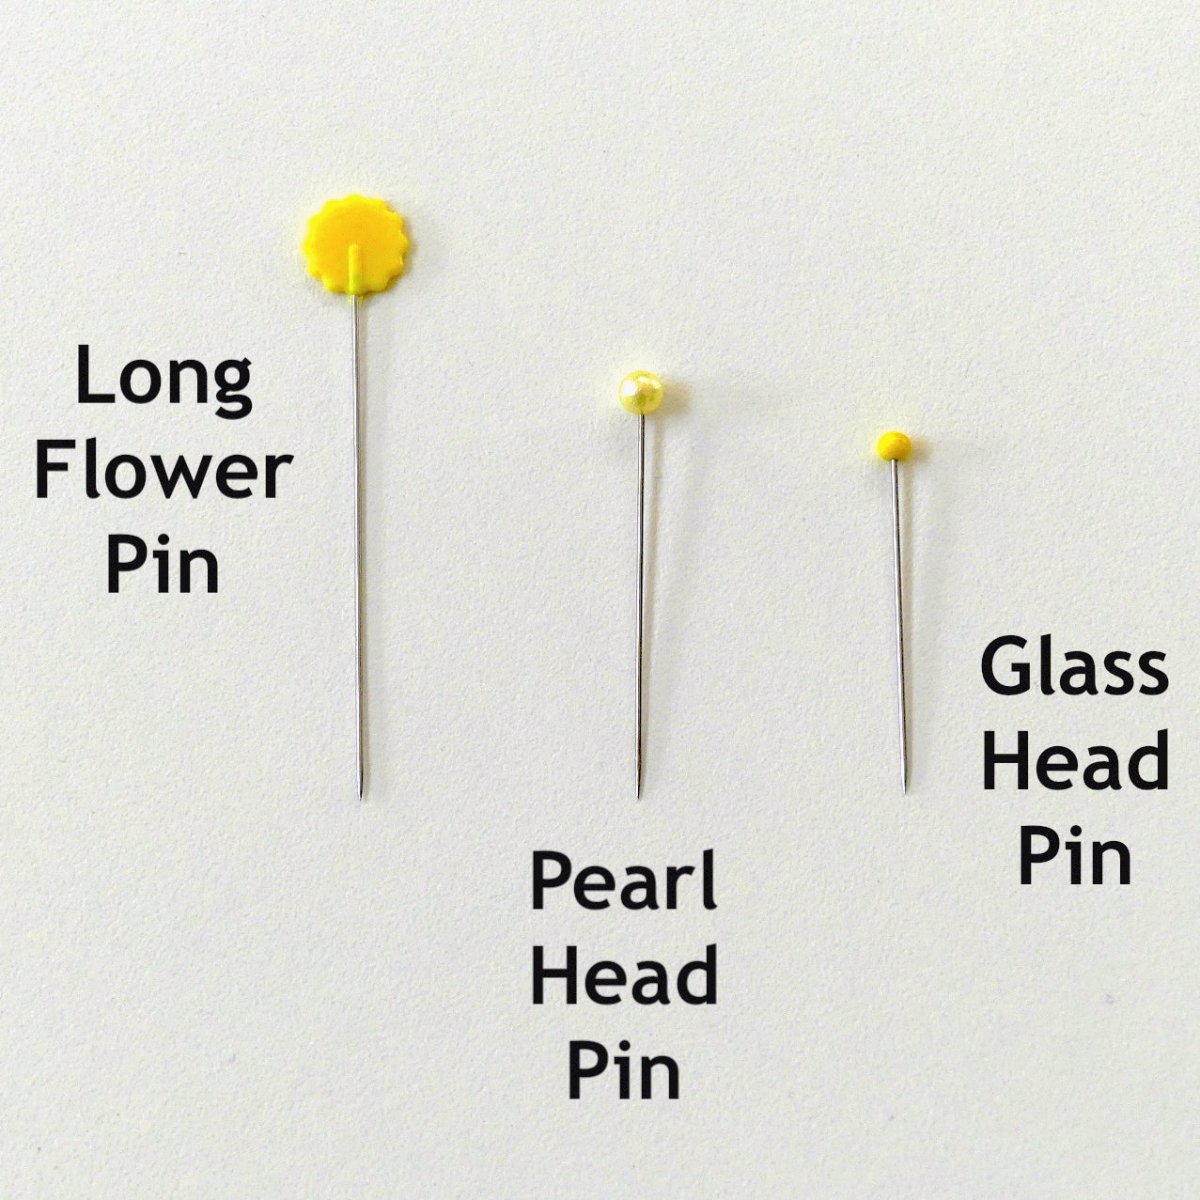 Glass Head Pin next to two other types of pins to show it's size in reference to them.